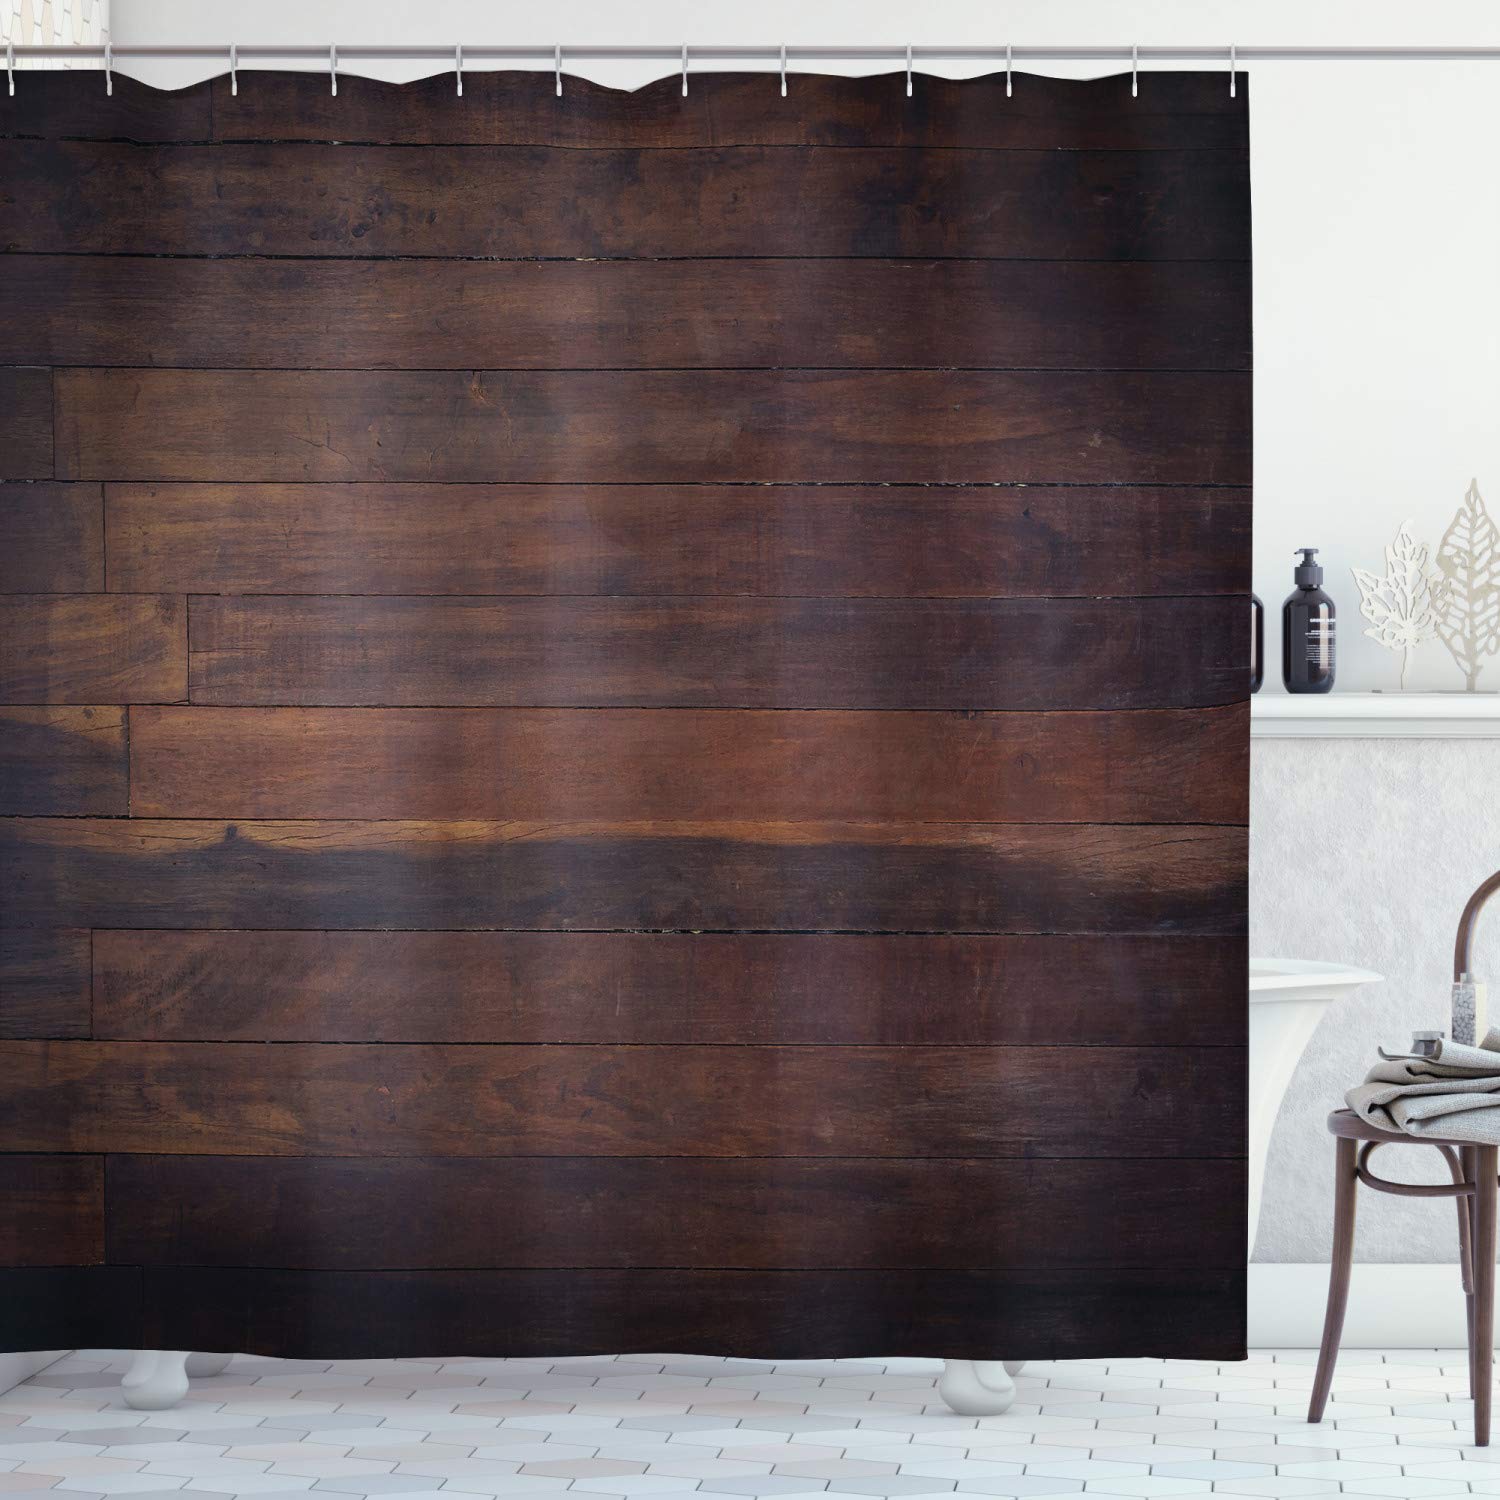 Ambesonne Chocolate Shower Curtain, Aged Weathered Dark Timber Oak Wooden Planks Floor Image Country Life Carpentry, Cloth Fabric Bathroom Decor Set with Hooks, 84 Inches Extra Long, Dark Brown